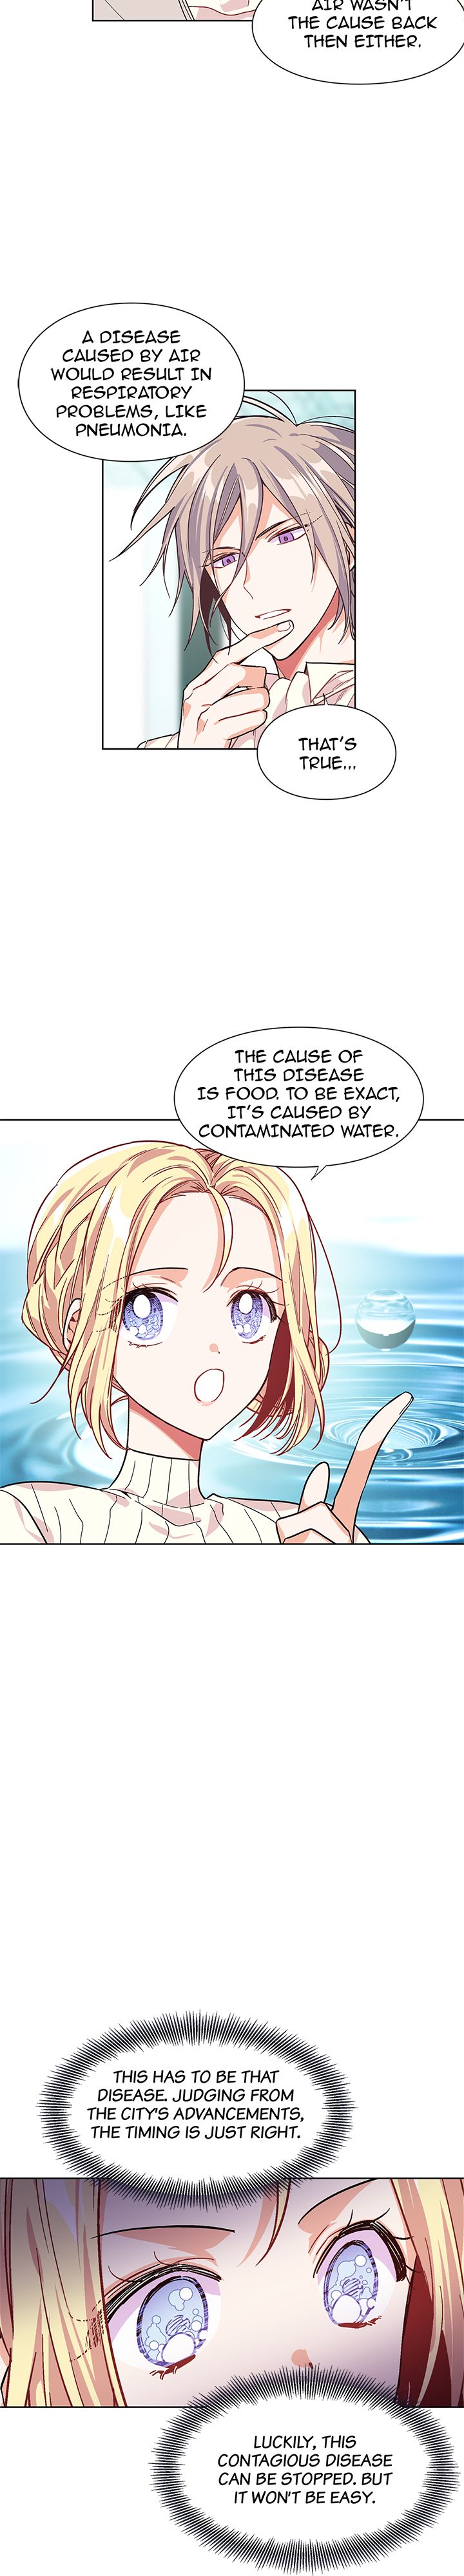 Doctor Elise - The Royal Lady with the Lamp - Chapter 44 Page 15